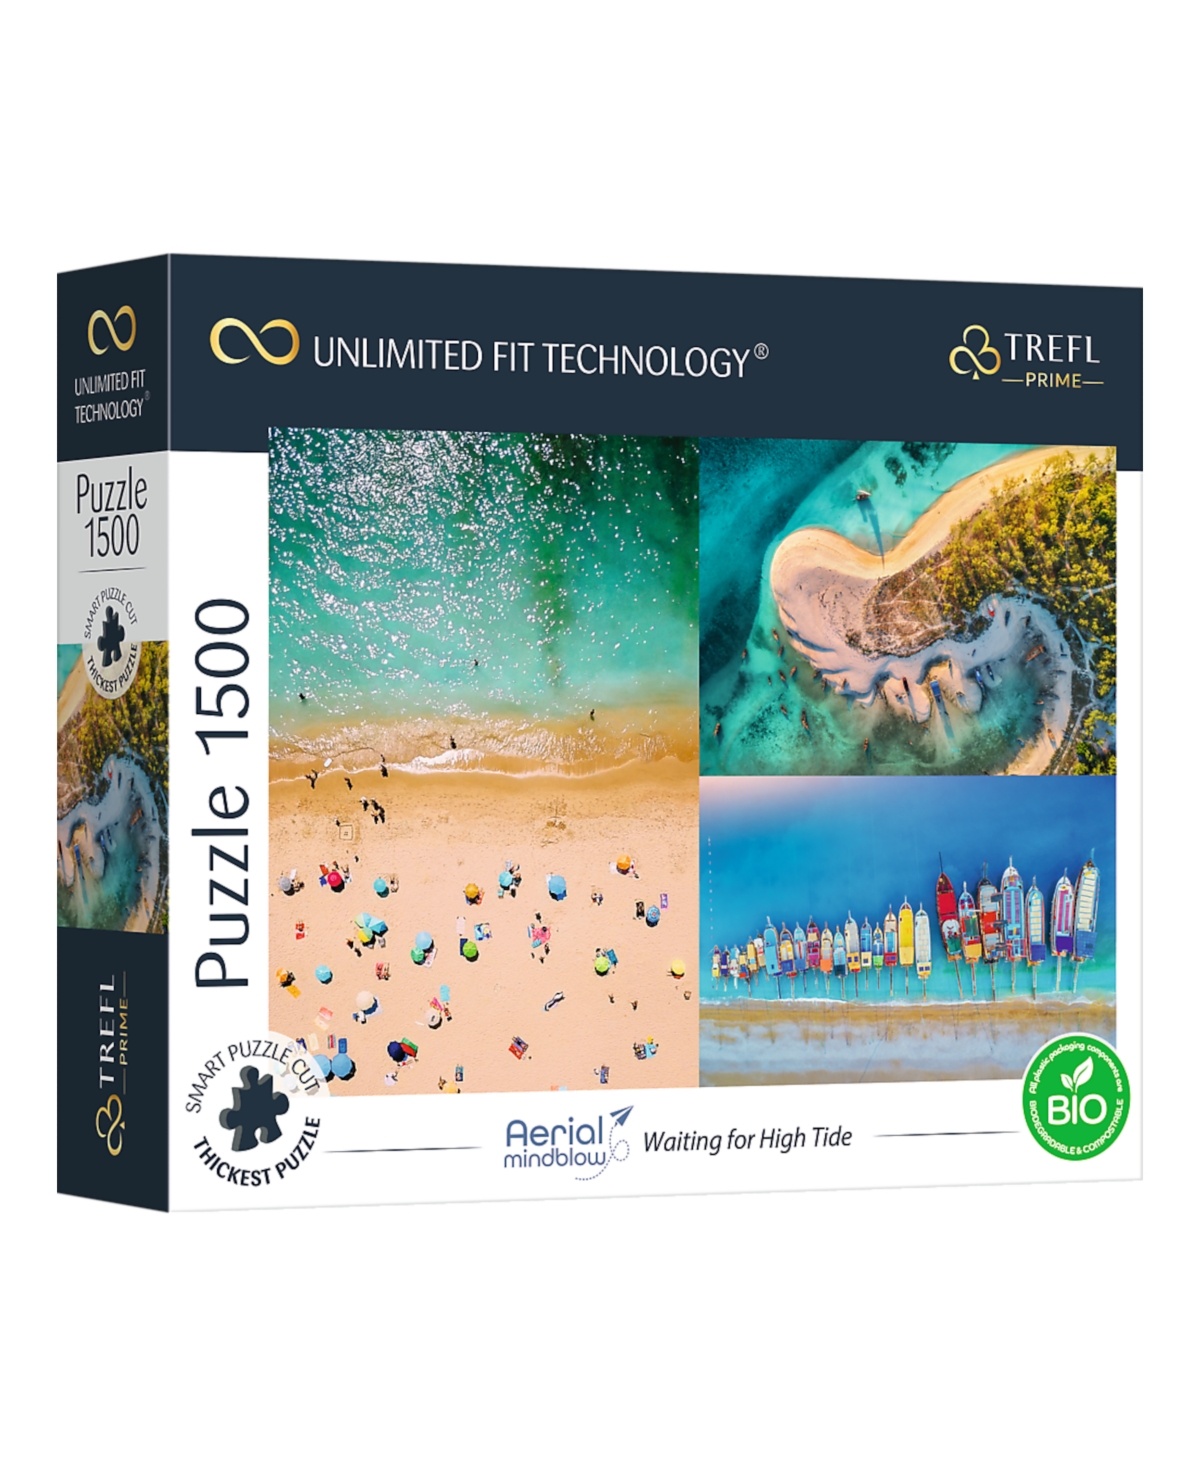 Trefl Prime 1500 Piece Puzzle- Aerial Mindblow Waiting For High Tide In Multi